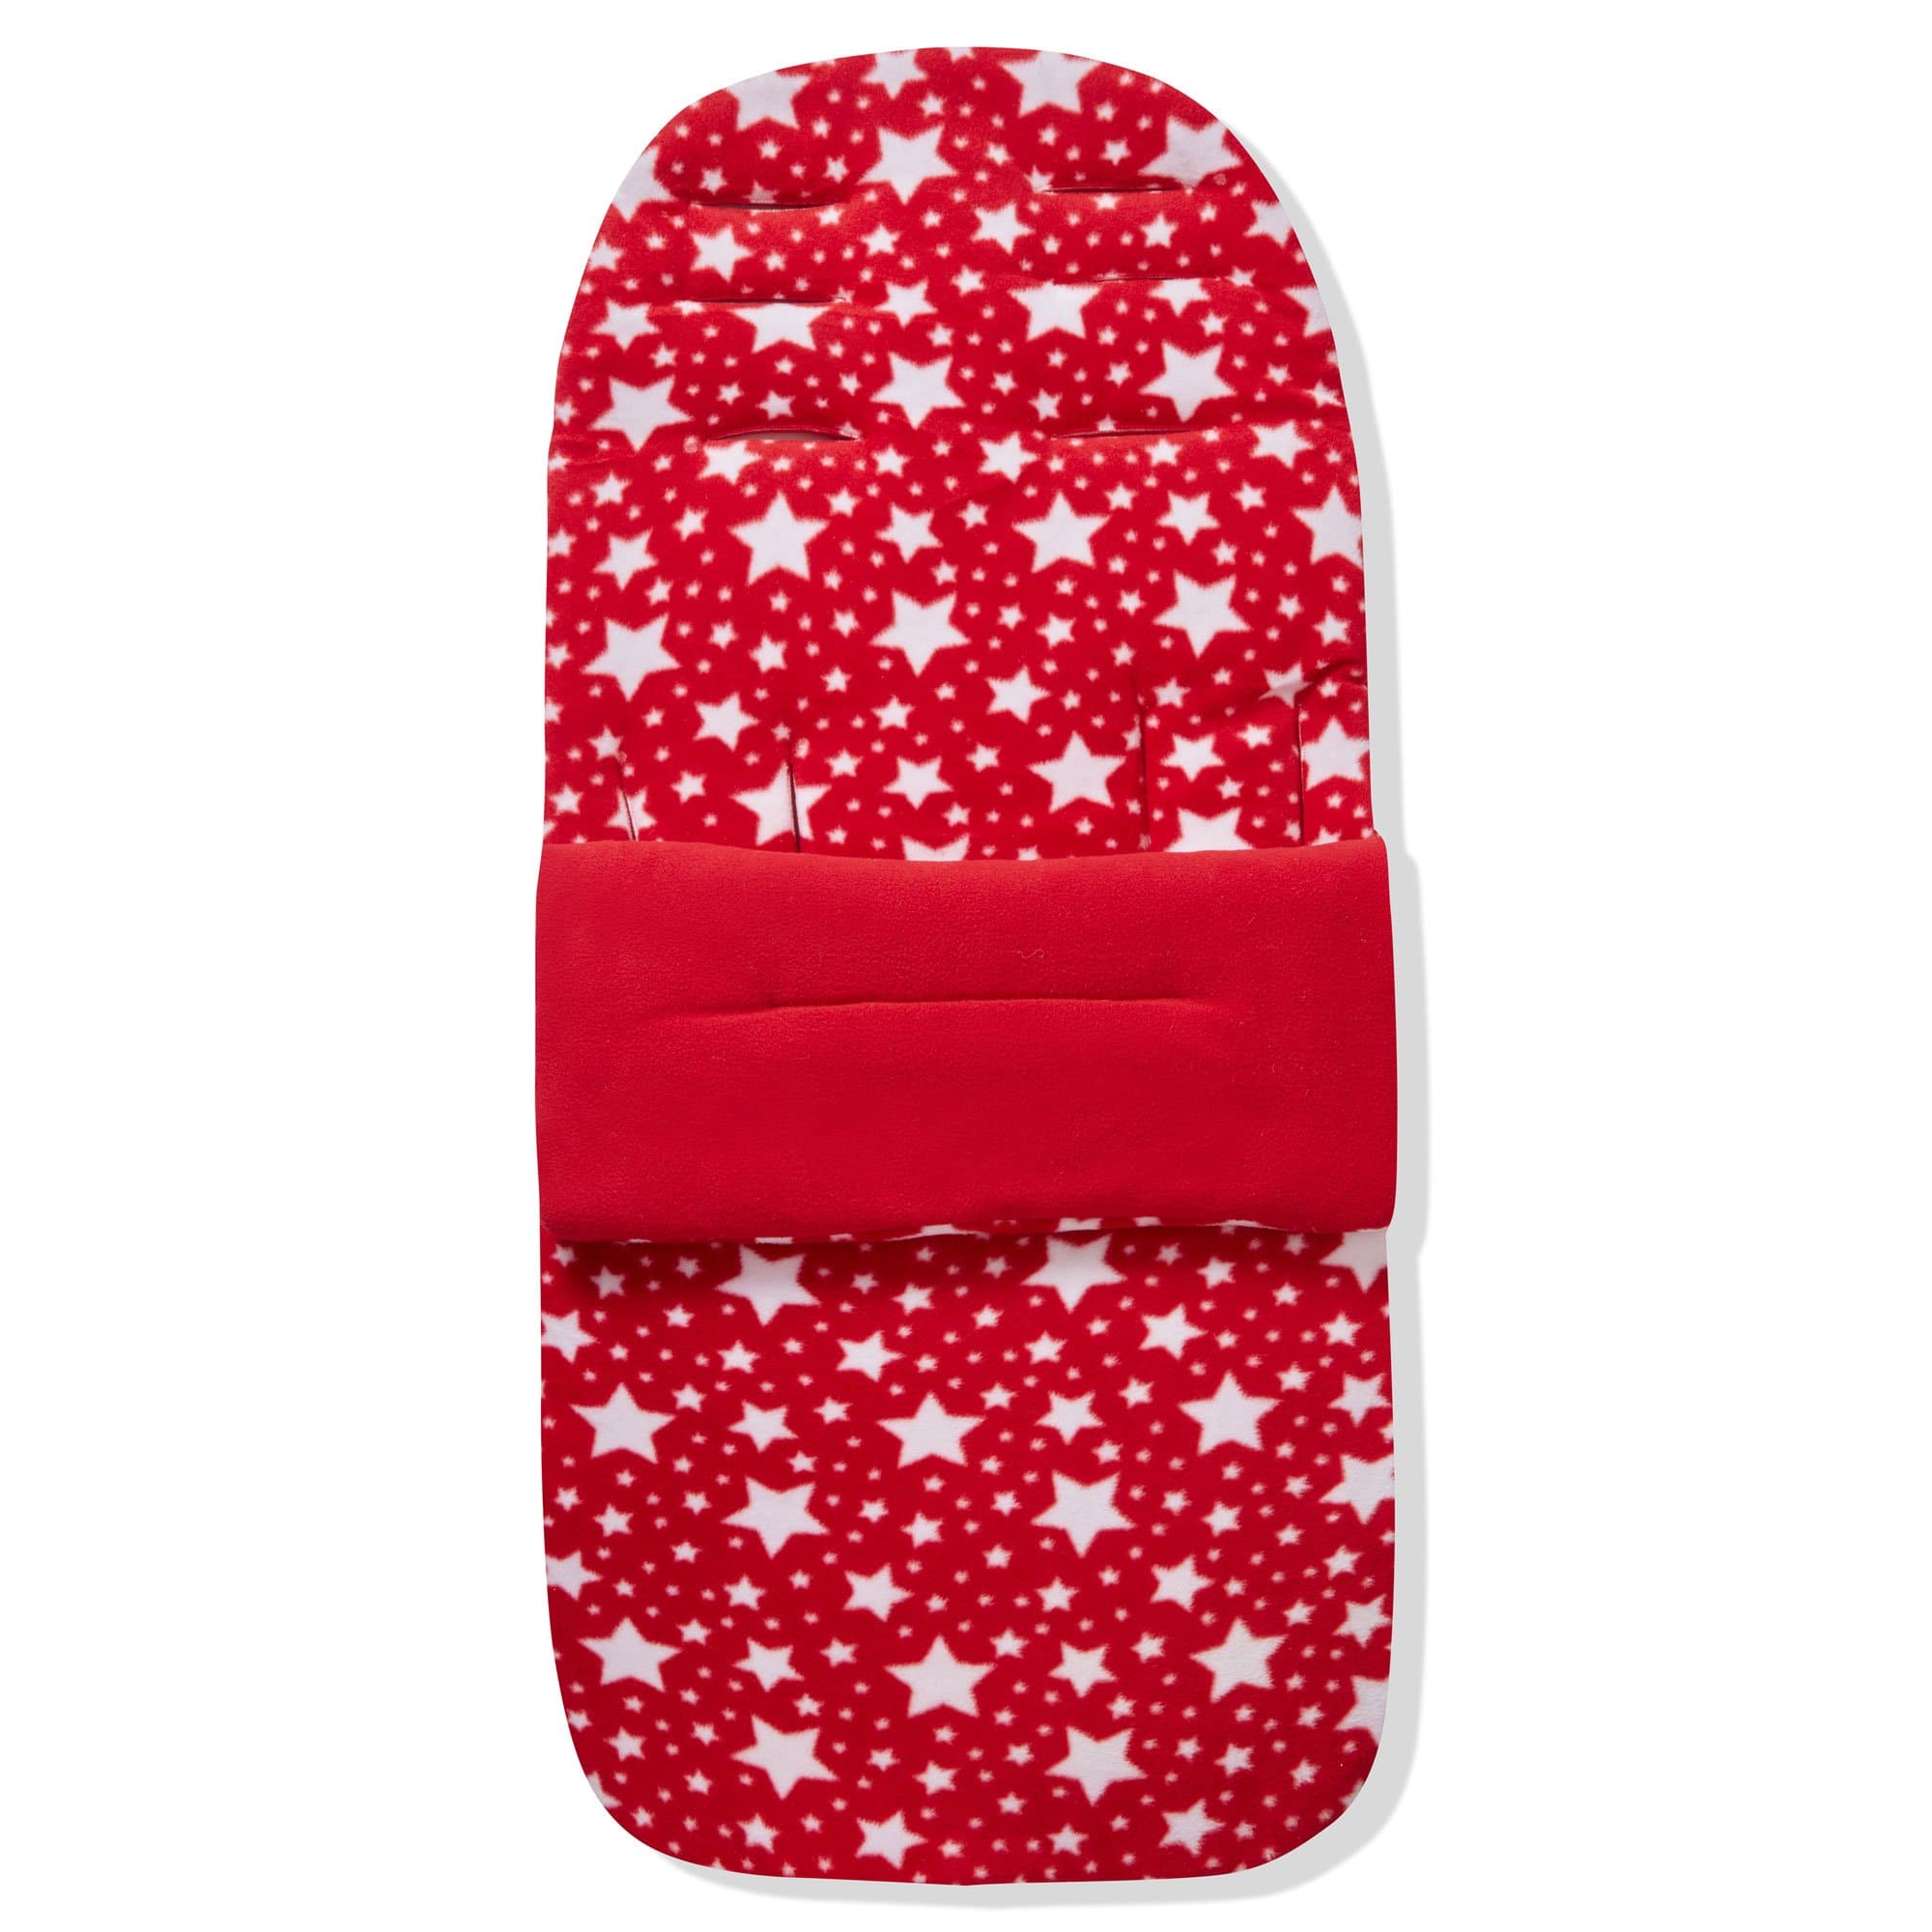 Fleece Footmuff / Cosy Toes Compatible with Infababy - Red Star / Fits All Models | For Your Little One